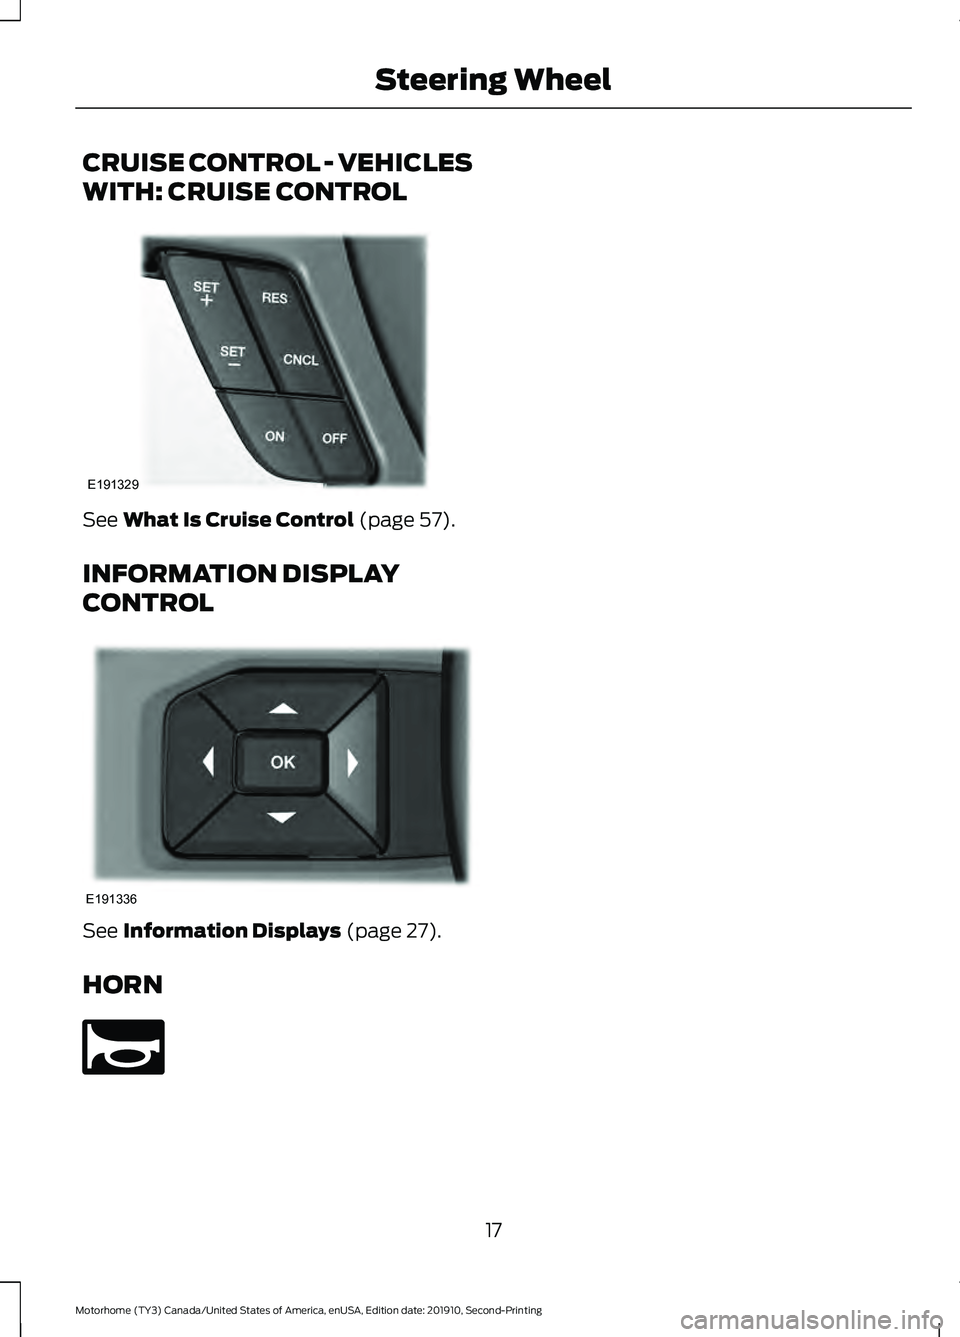 FORD F-53 2020 User Guide CRUISE CONTROL - VEHICLES
WITH: CRUISE CONTROL
See What Is Cruise Control (page 57).
INFORMATION DISPLAY
CONTROL See 
Information Displays (page 27).
HORN 17
Motorhome (TY3) Canada/United States of Am